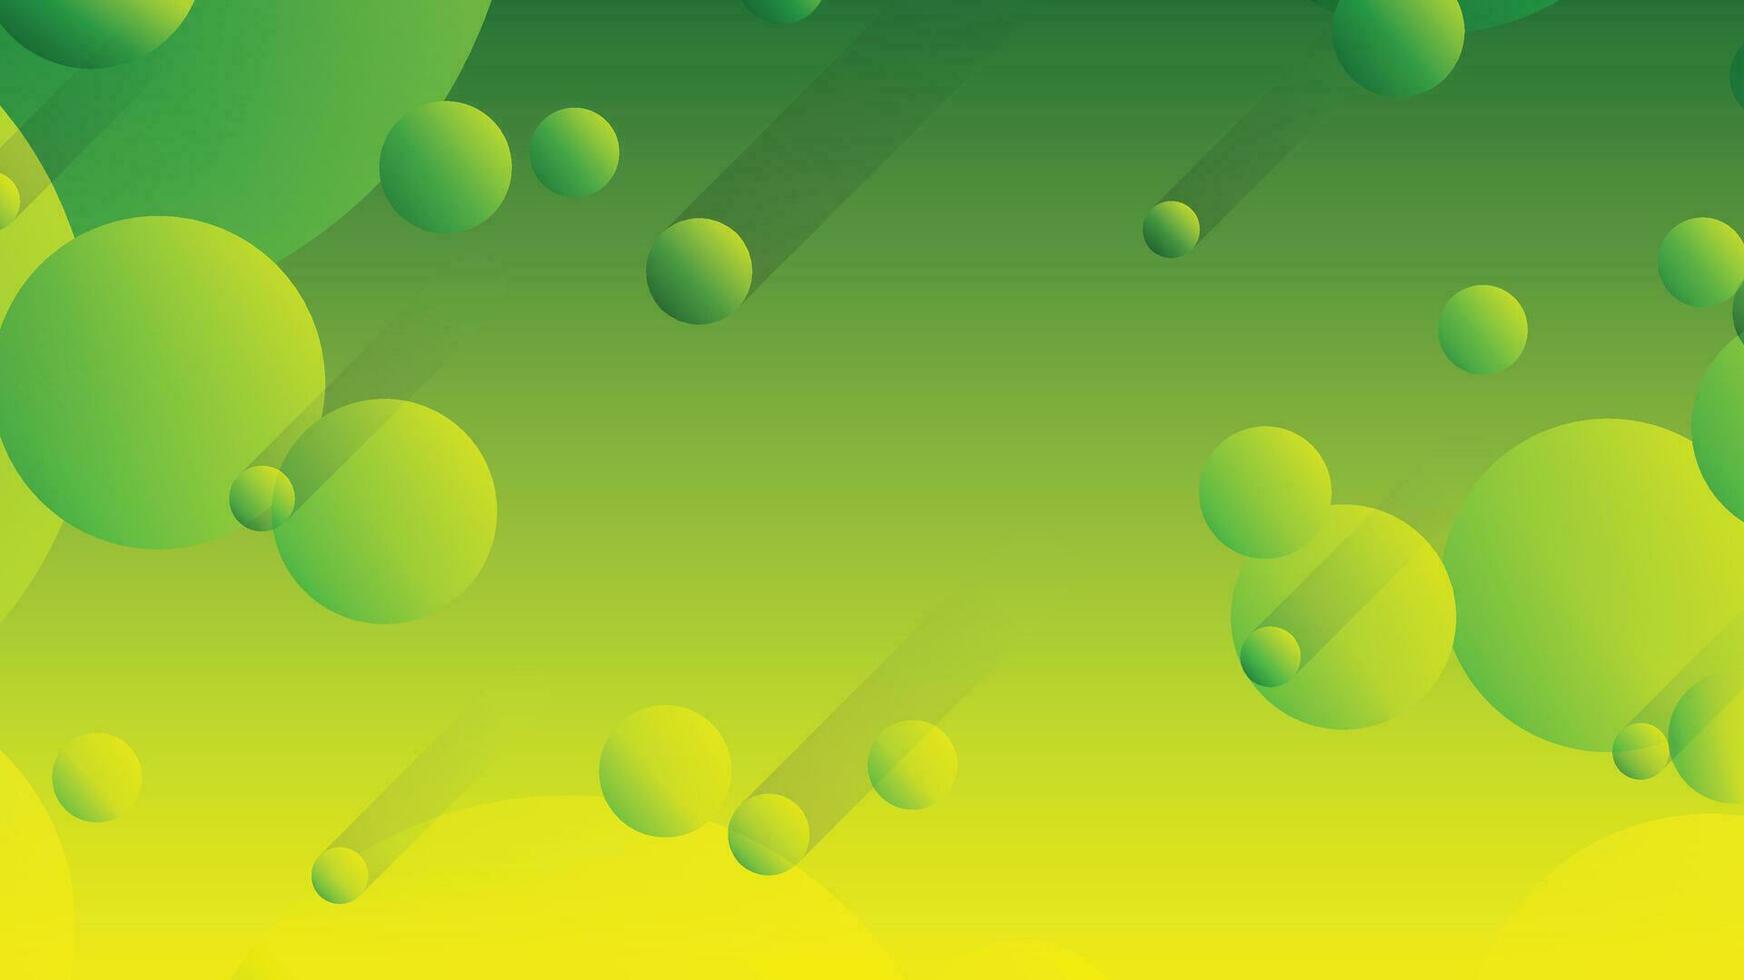 Green and yellow abstract circle gradient modern graphic background vector